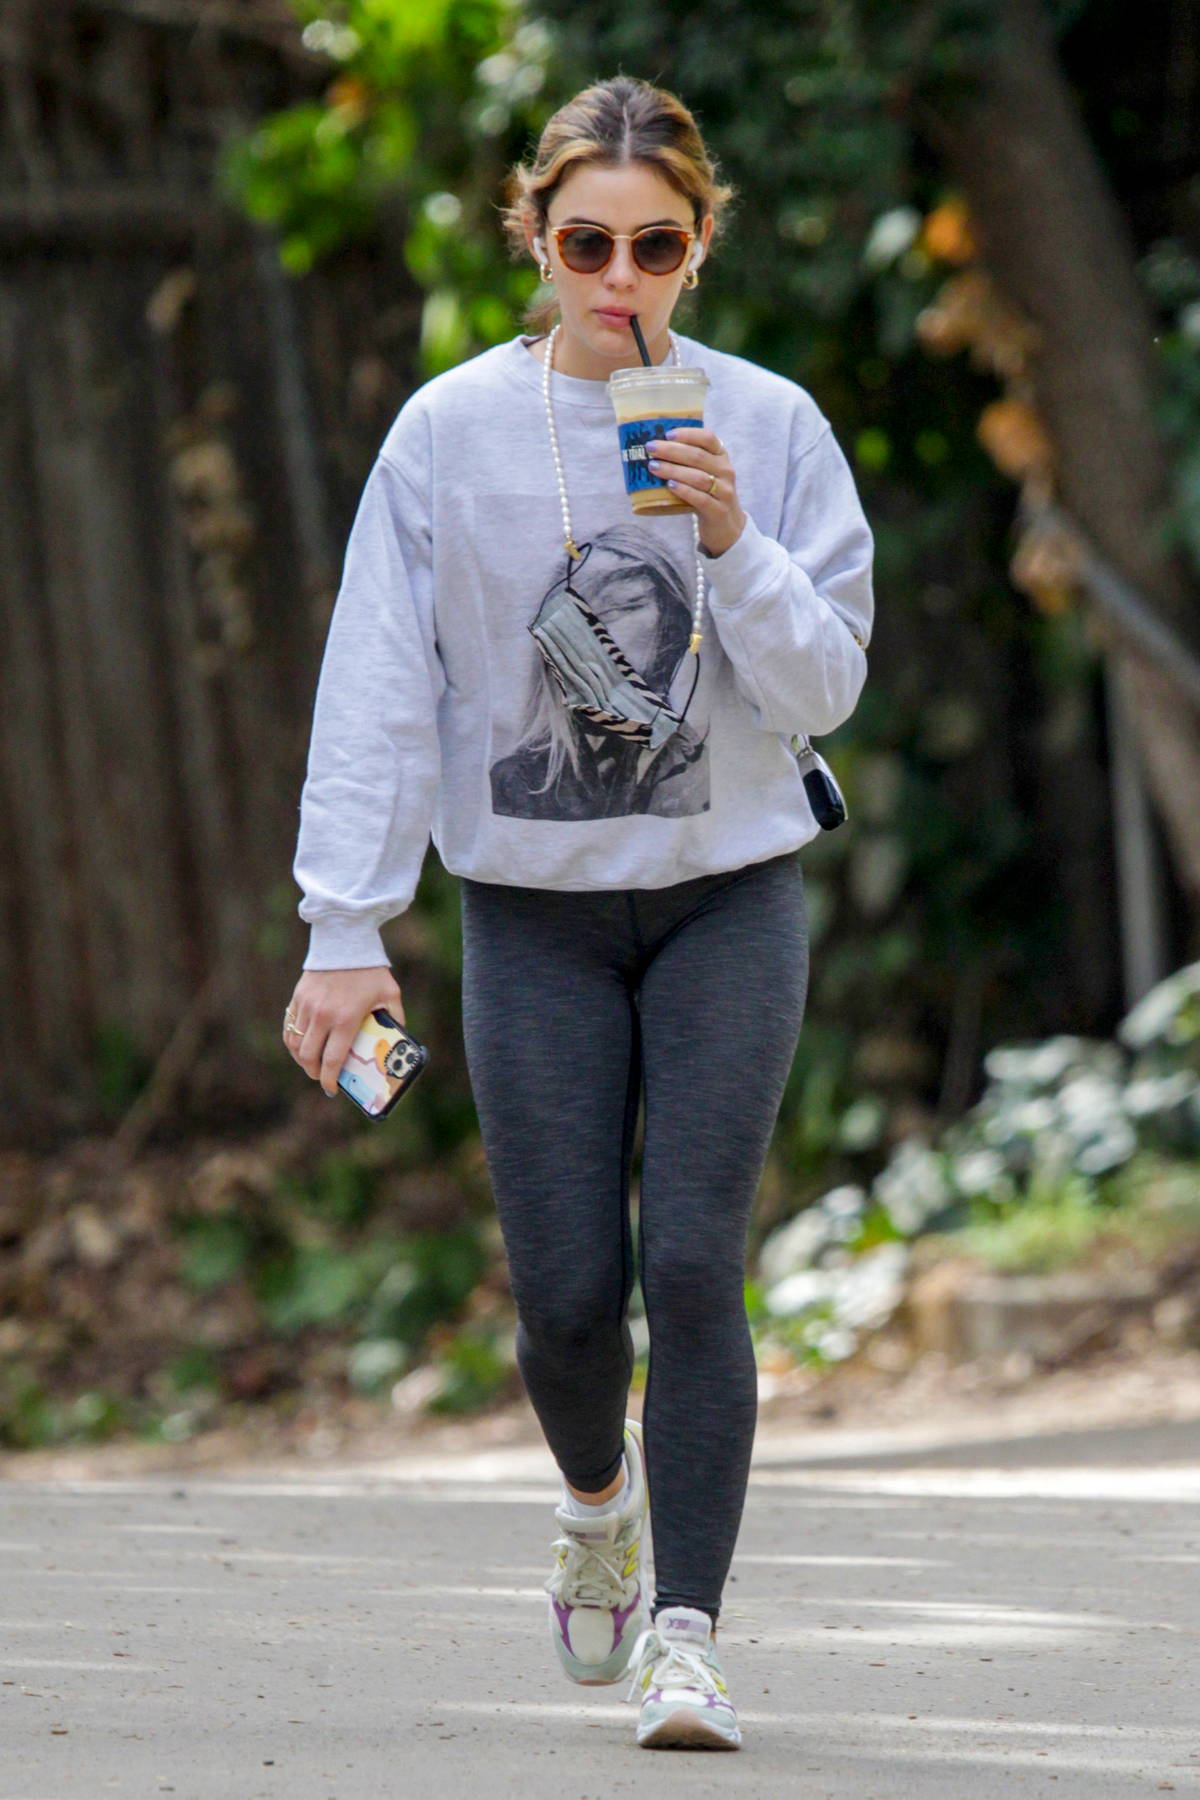 https://www.celebsfirst.com/wp-content/uploads/2021/03/lucy-hale-wears-sweatshirt-and-dark-grey-leggings-as-she-grabs-a-coffee-and-enjoys-a-solo-hike-in-studio-city-california-080321_22.jpg